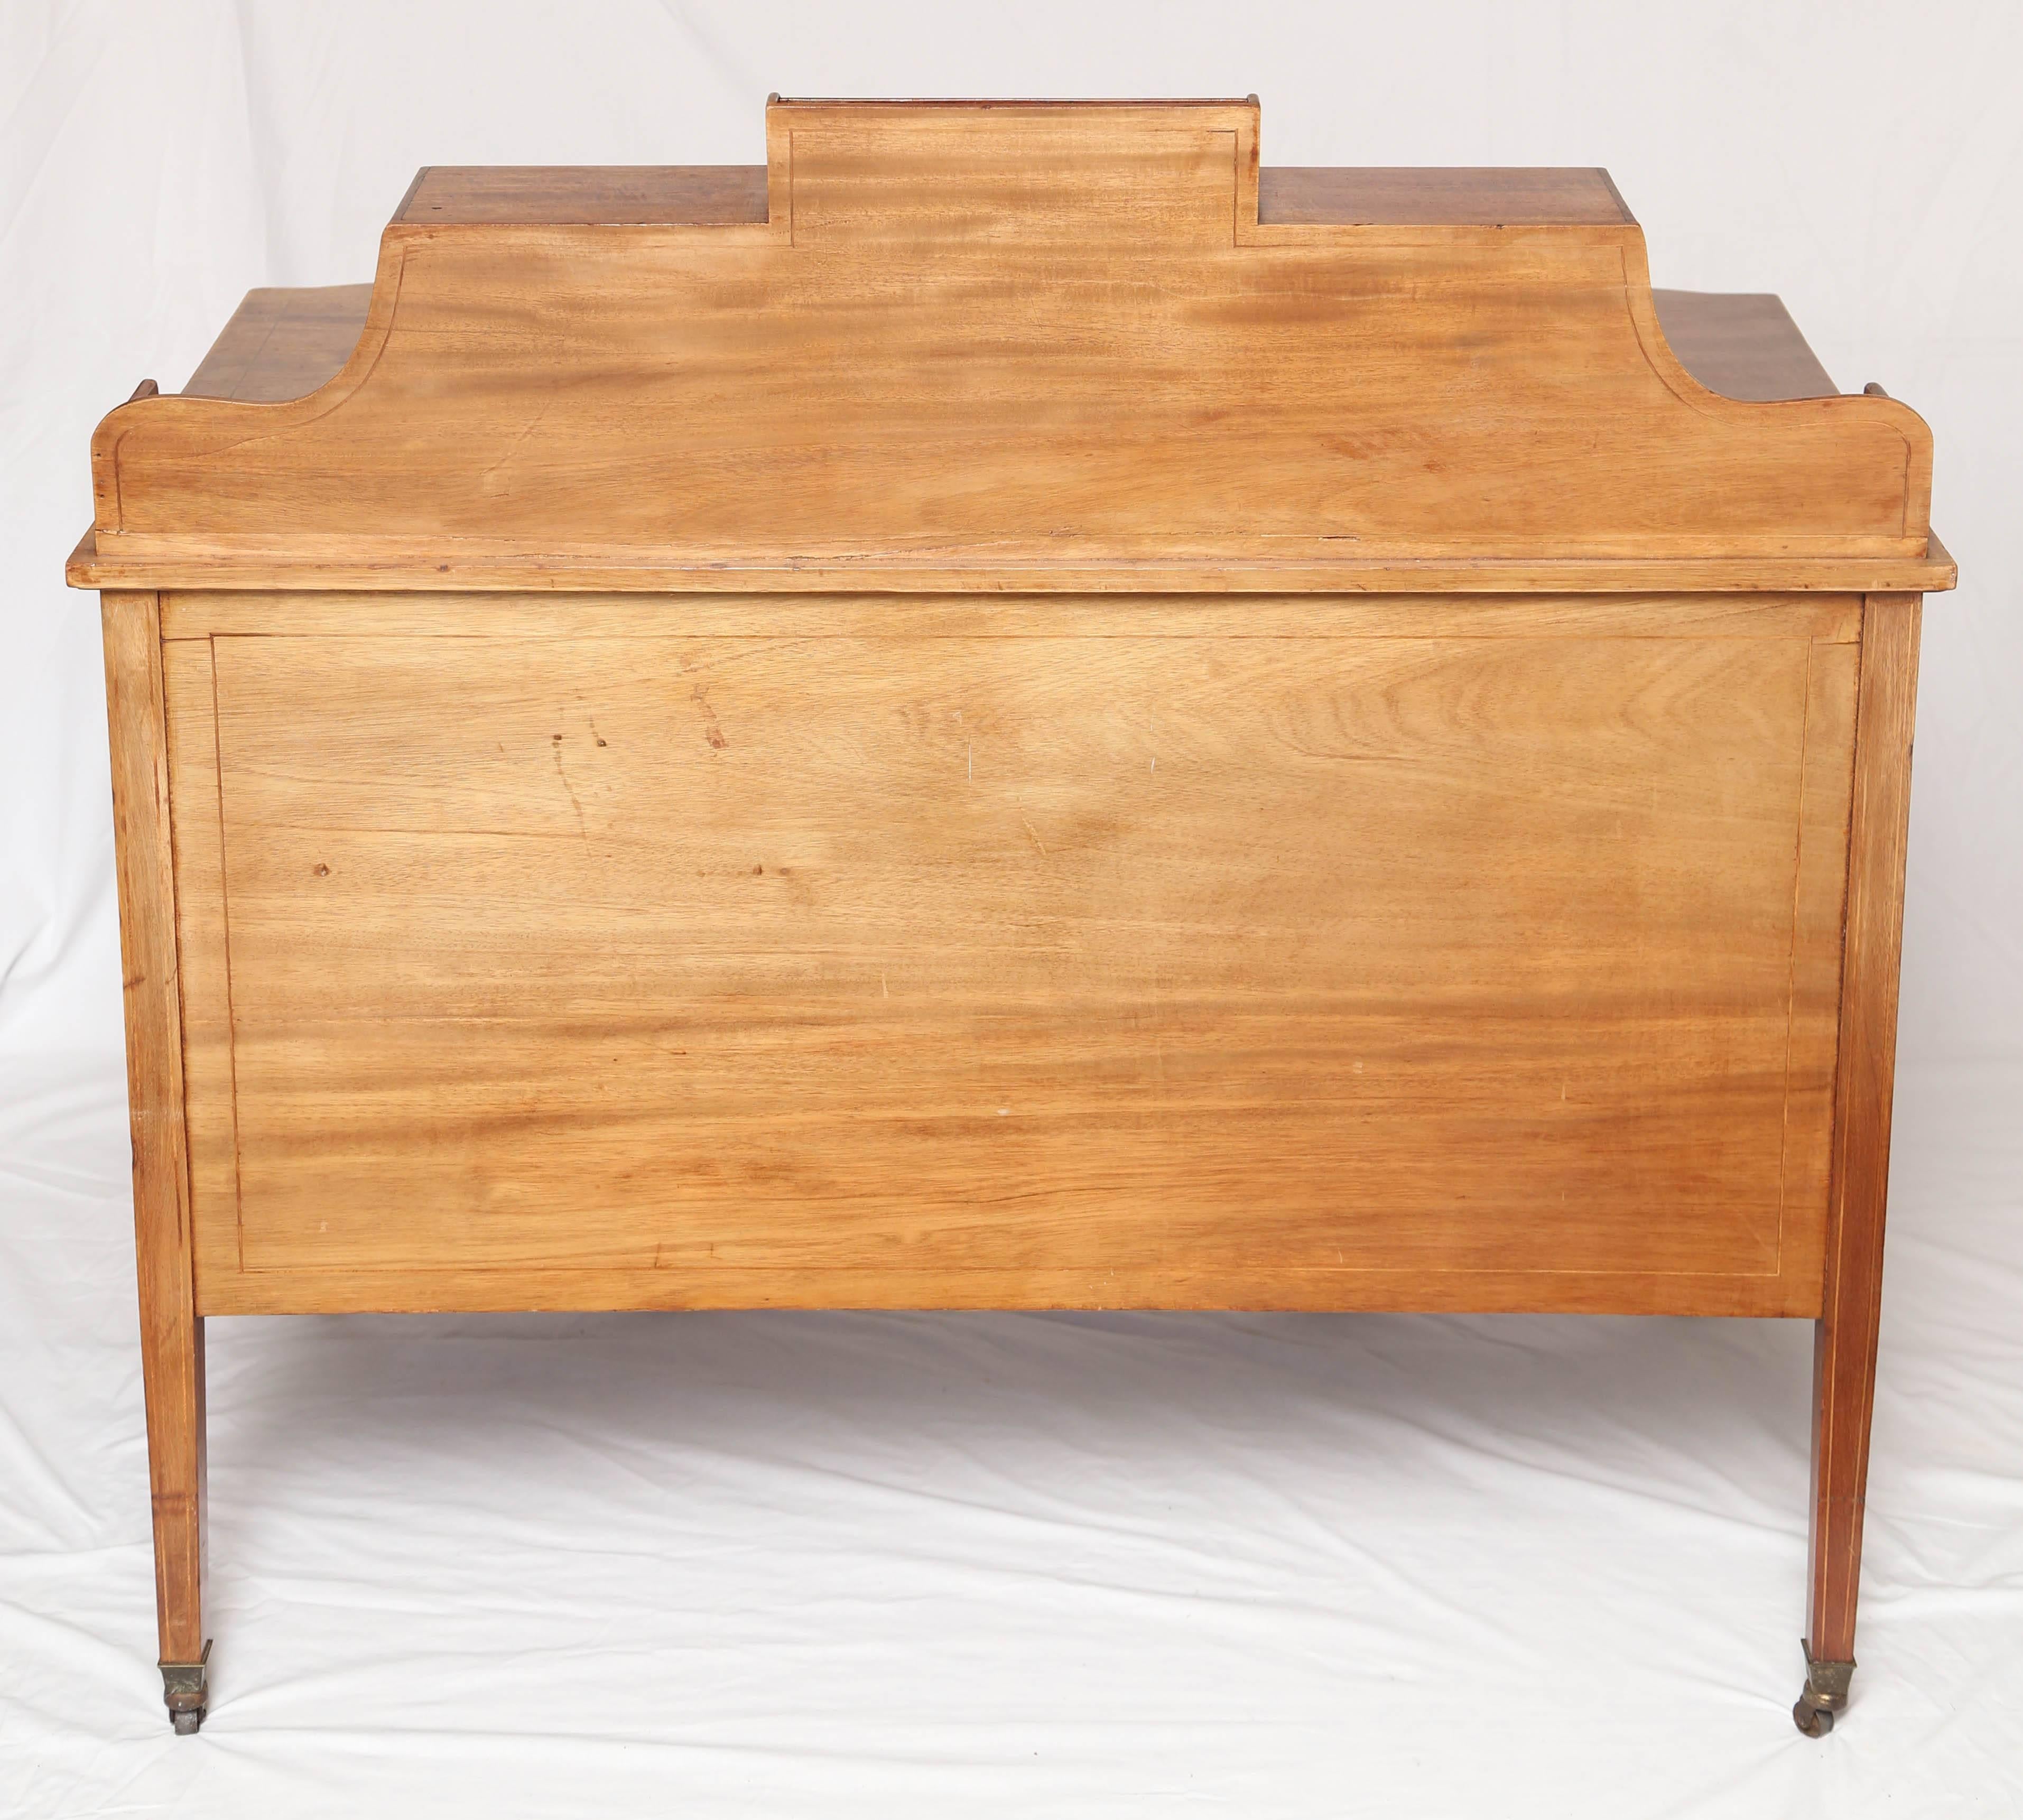 Superb Mahogany American Writing Desk with Leather Holder and Drawers 2